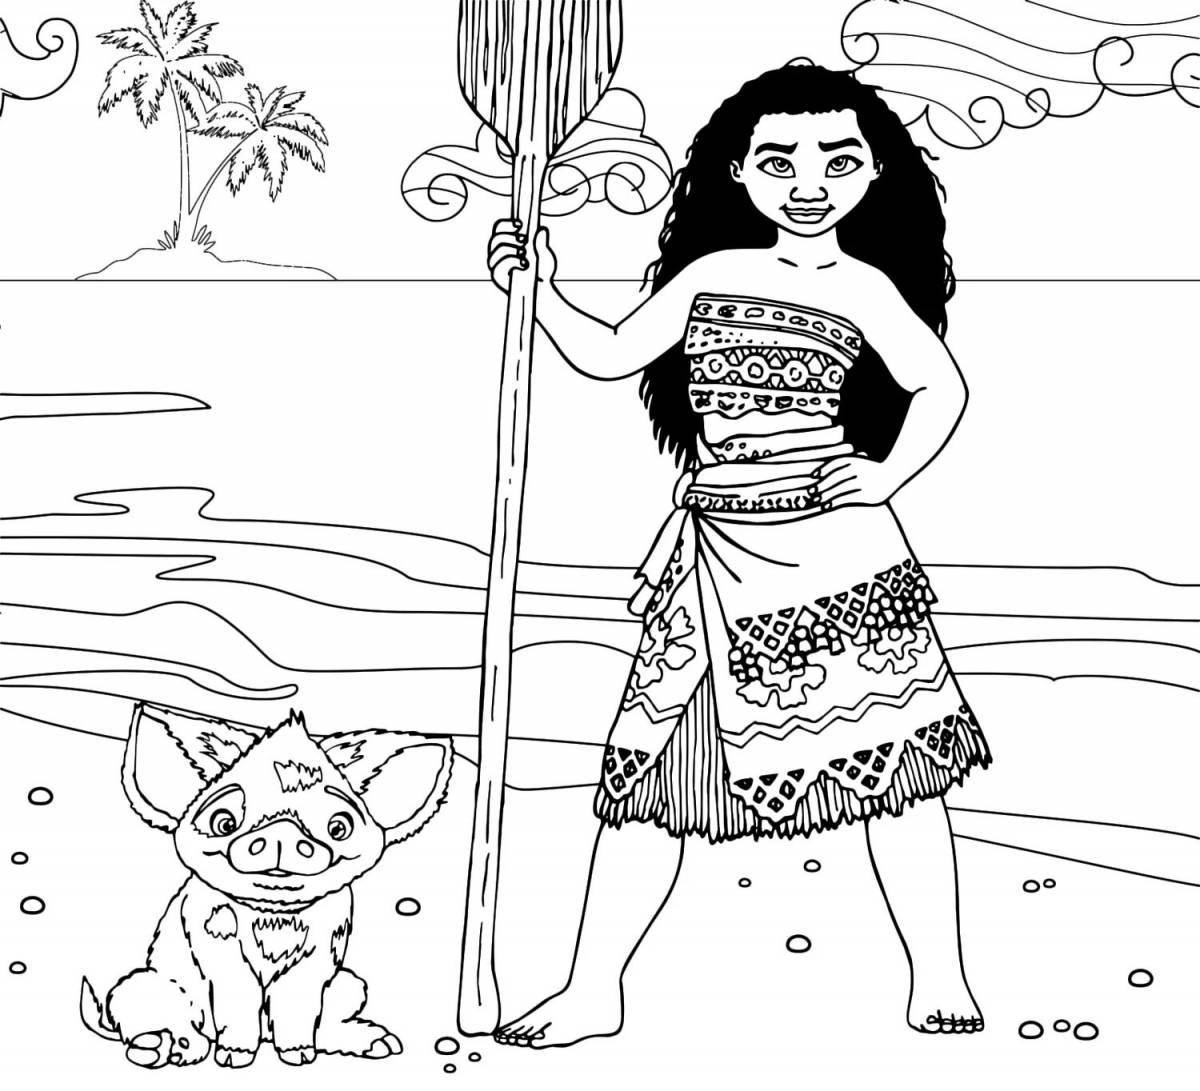 Delightful moana coloring book for kids